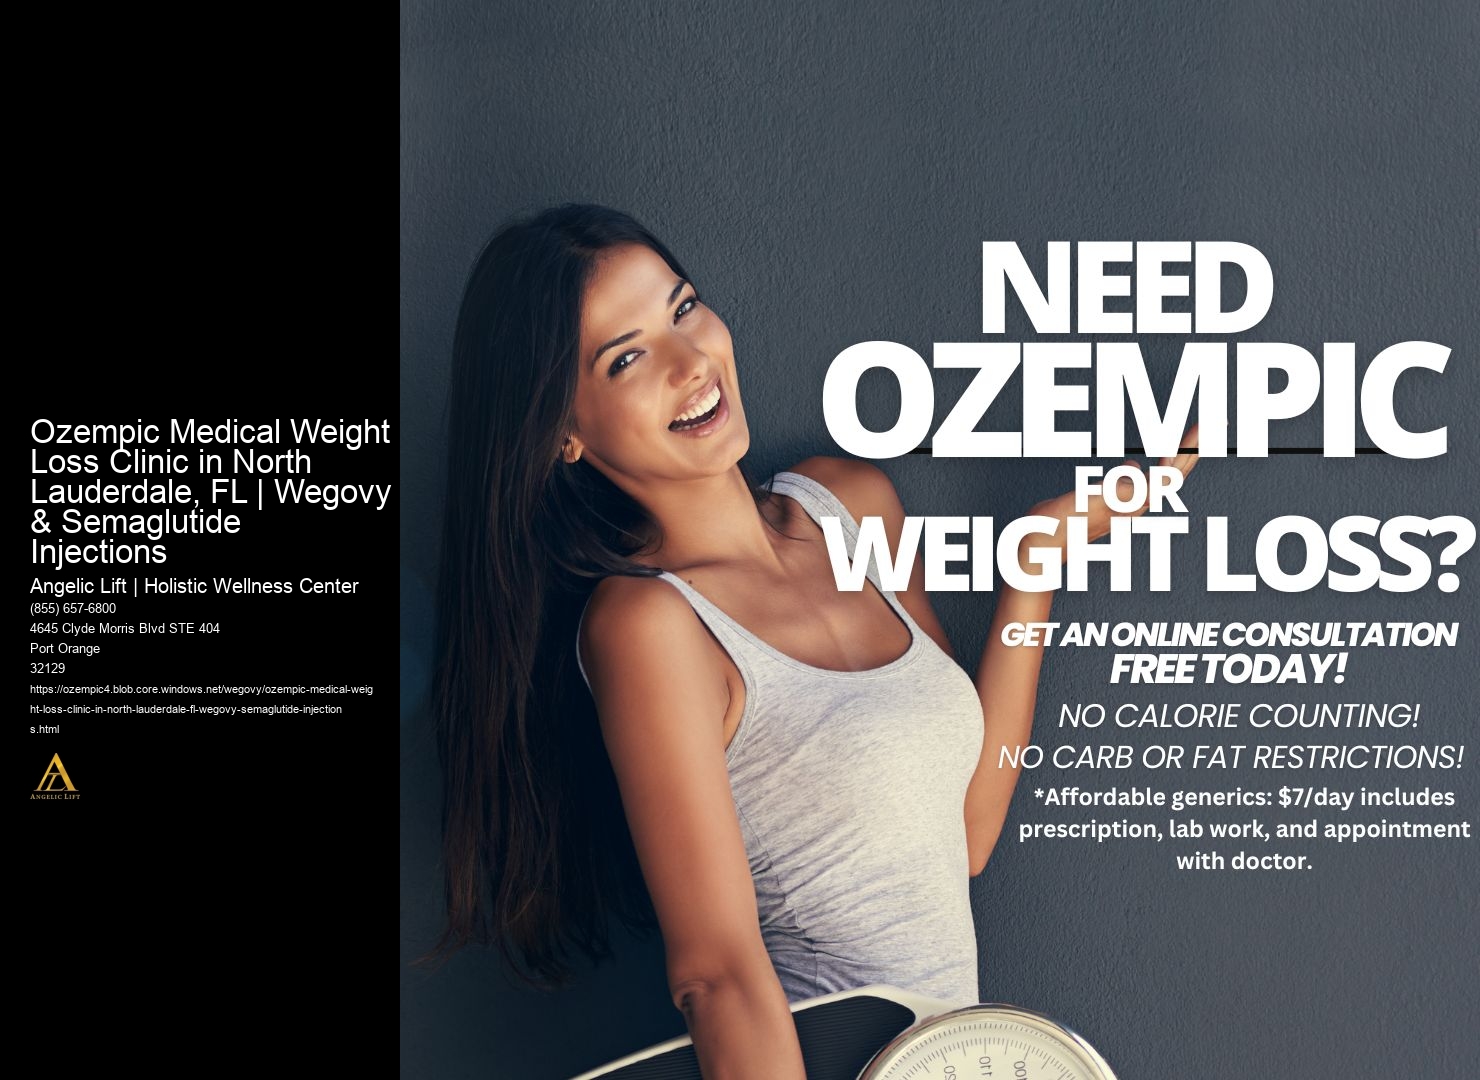 Ozempic Medical Weight Loss Clinic in North Lauderdale, FL | Wegovy & Semaglutide Injections